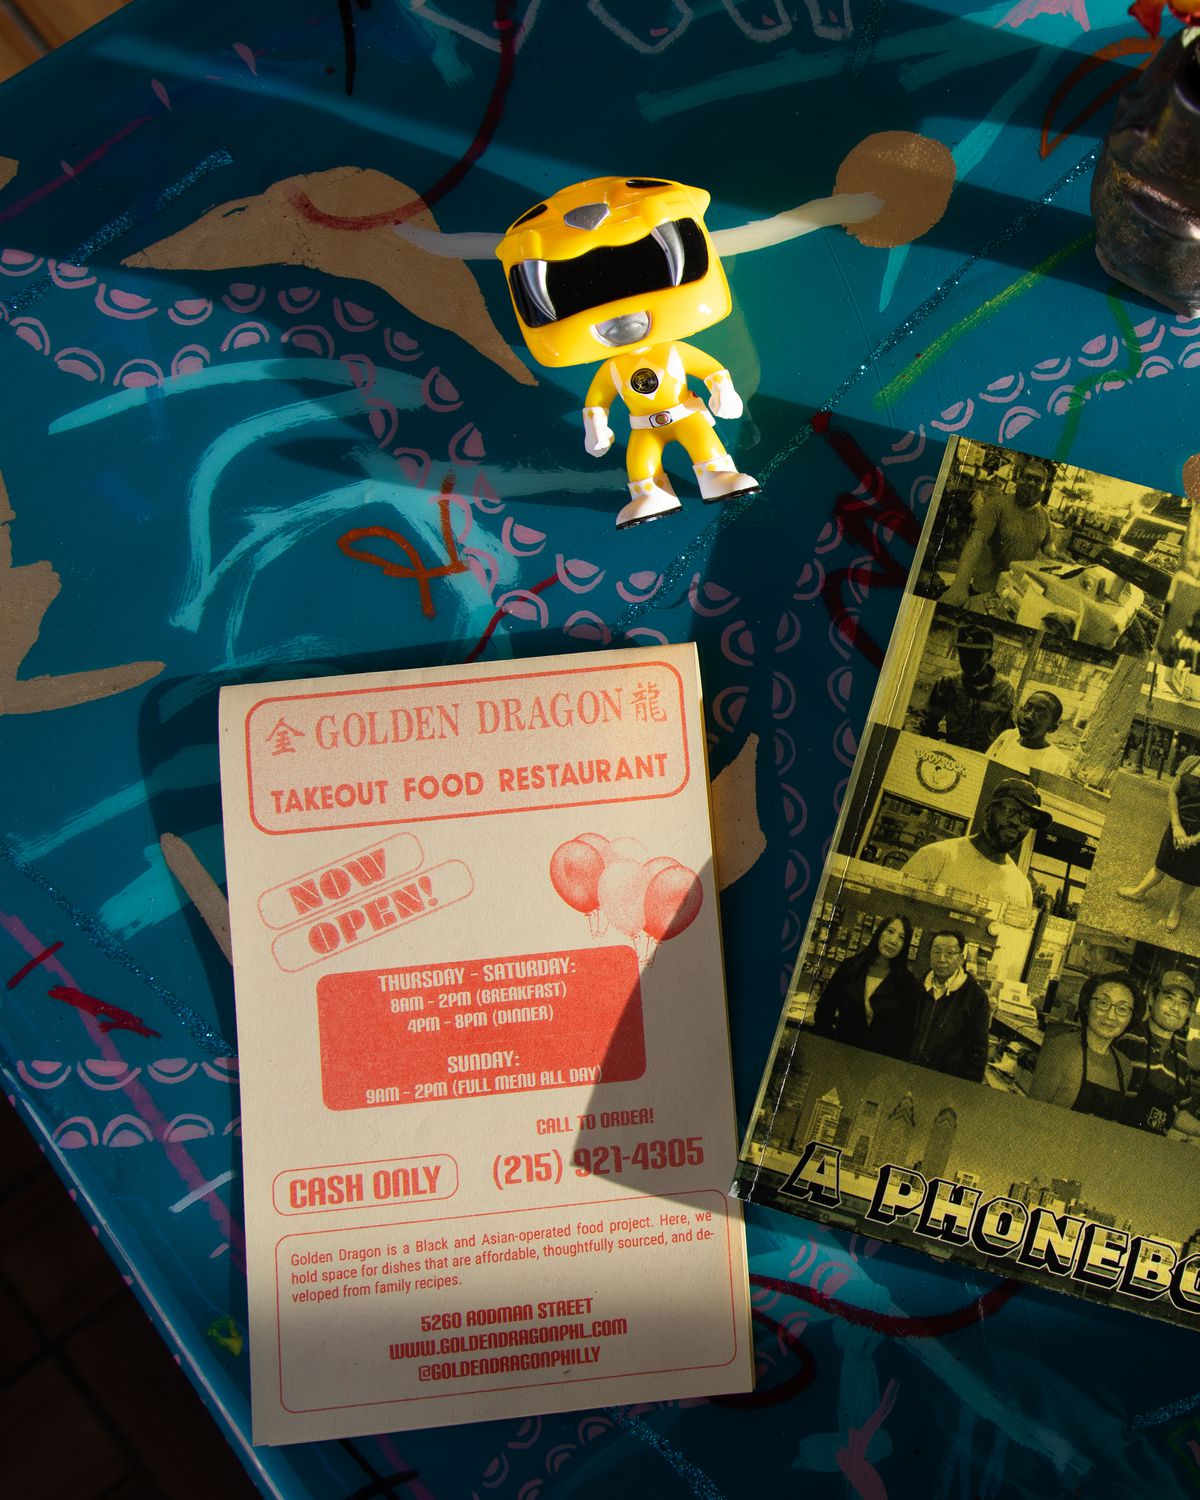 An overhead shot of a menu that reads Golden Dragon Takeout Food Restaurant, a yellow power ranger toy, and a black and white zine with yellow overlay.